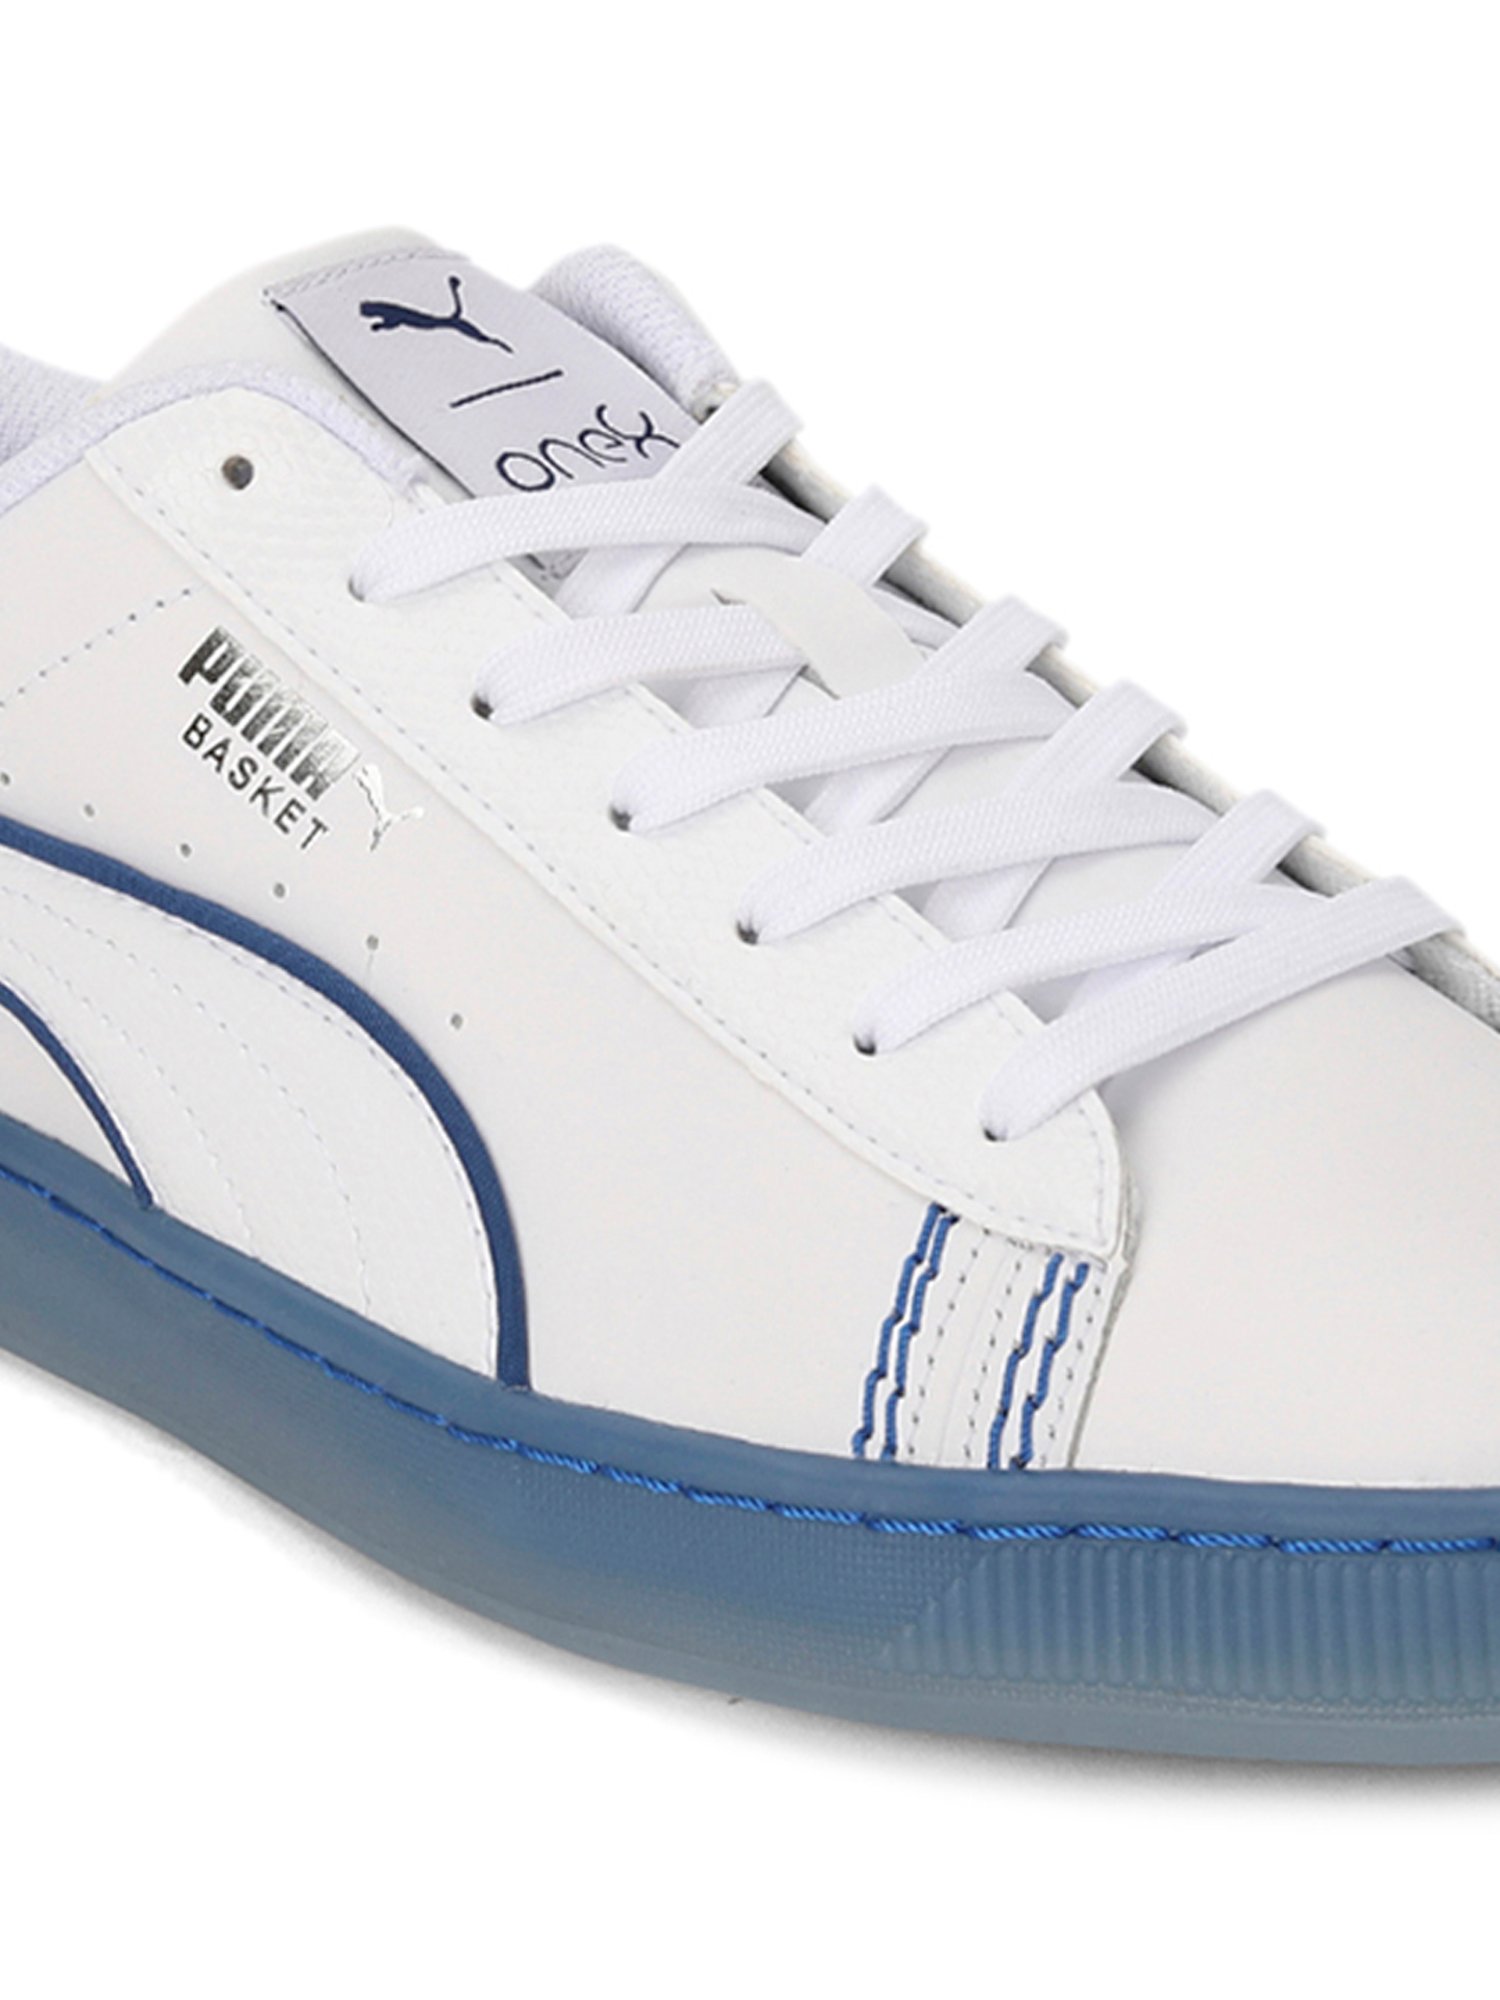 Aggregate 133+ puma one8 basket sneakers best